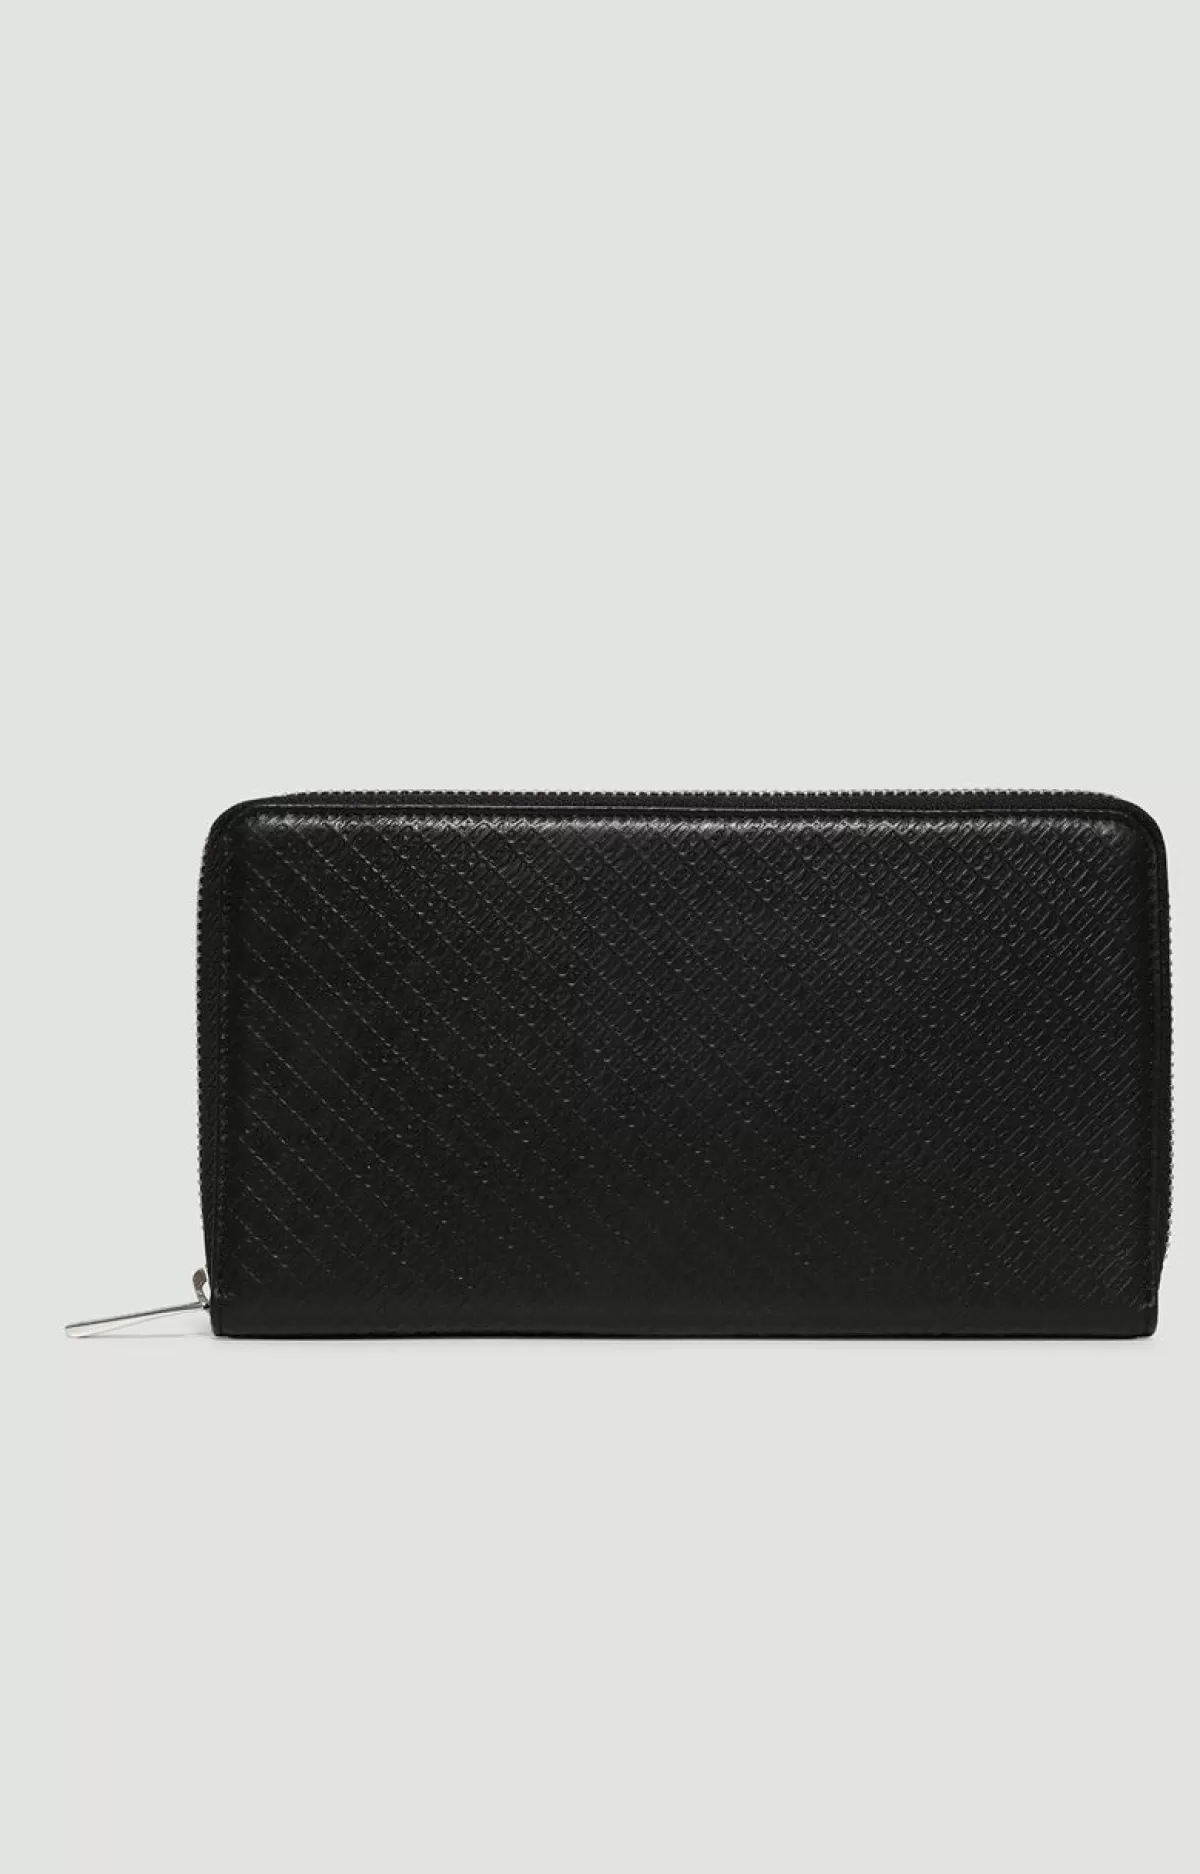 Bikkembergs Men'S Leather Clutch With All-Over Pattern - Asher Black Best